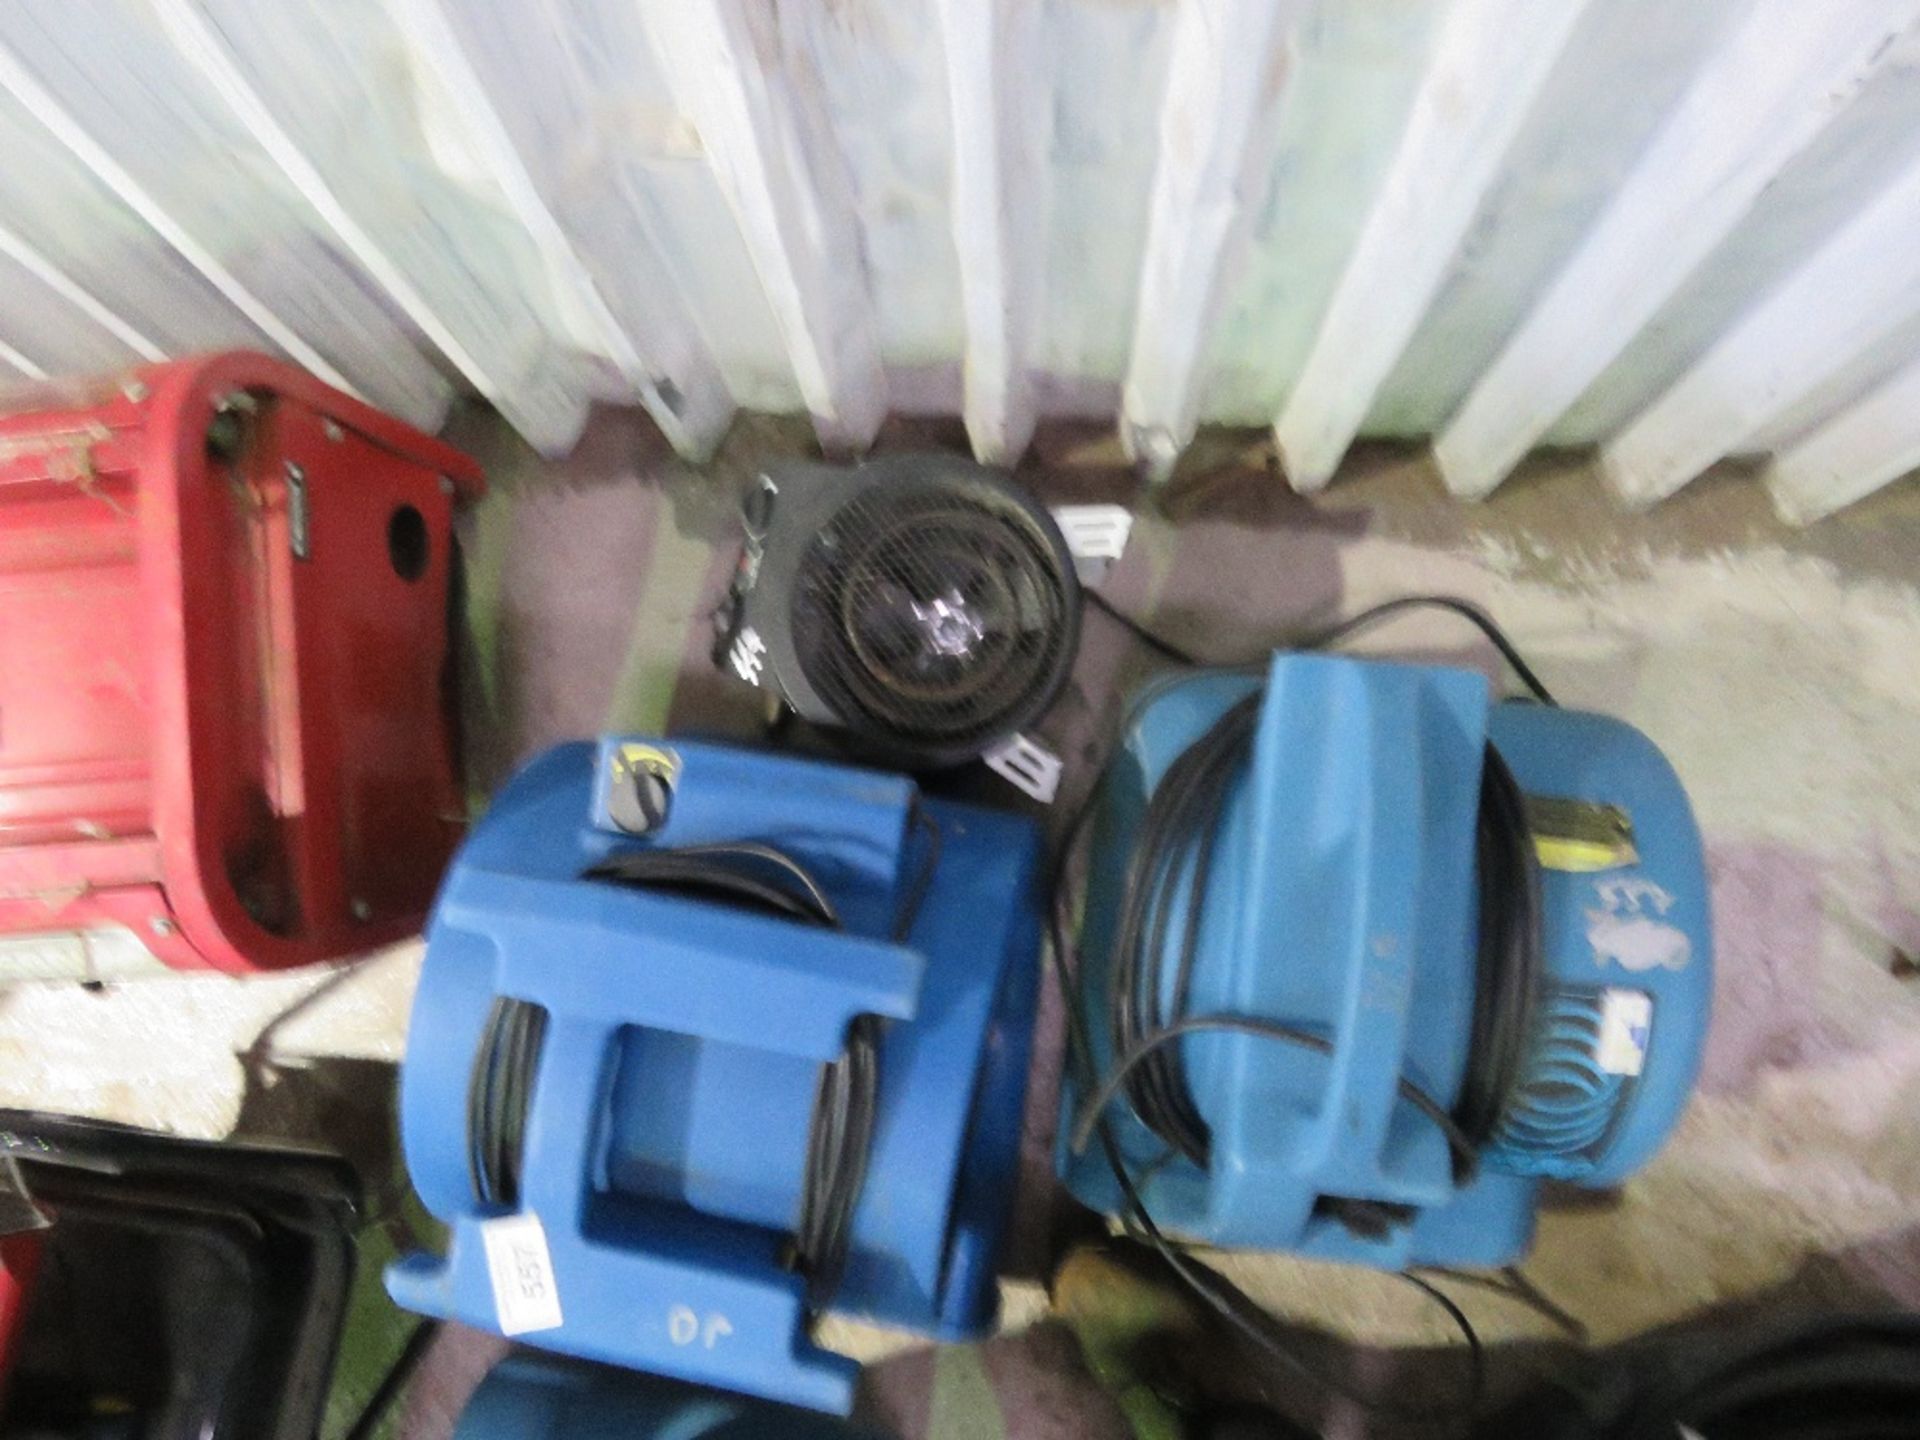 2 X SNAIL BLOWER CARPET DRYING FANS, 240 VOLT PLUS A 3KW FAN HEATER. THIS LOT IS SOLD UNDER THE A - Image 2 of 3